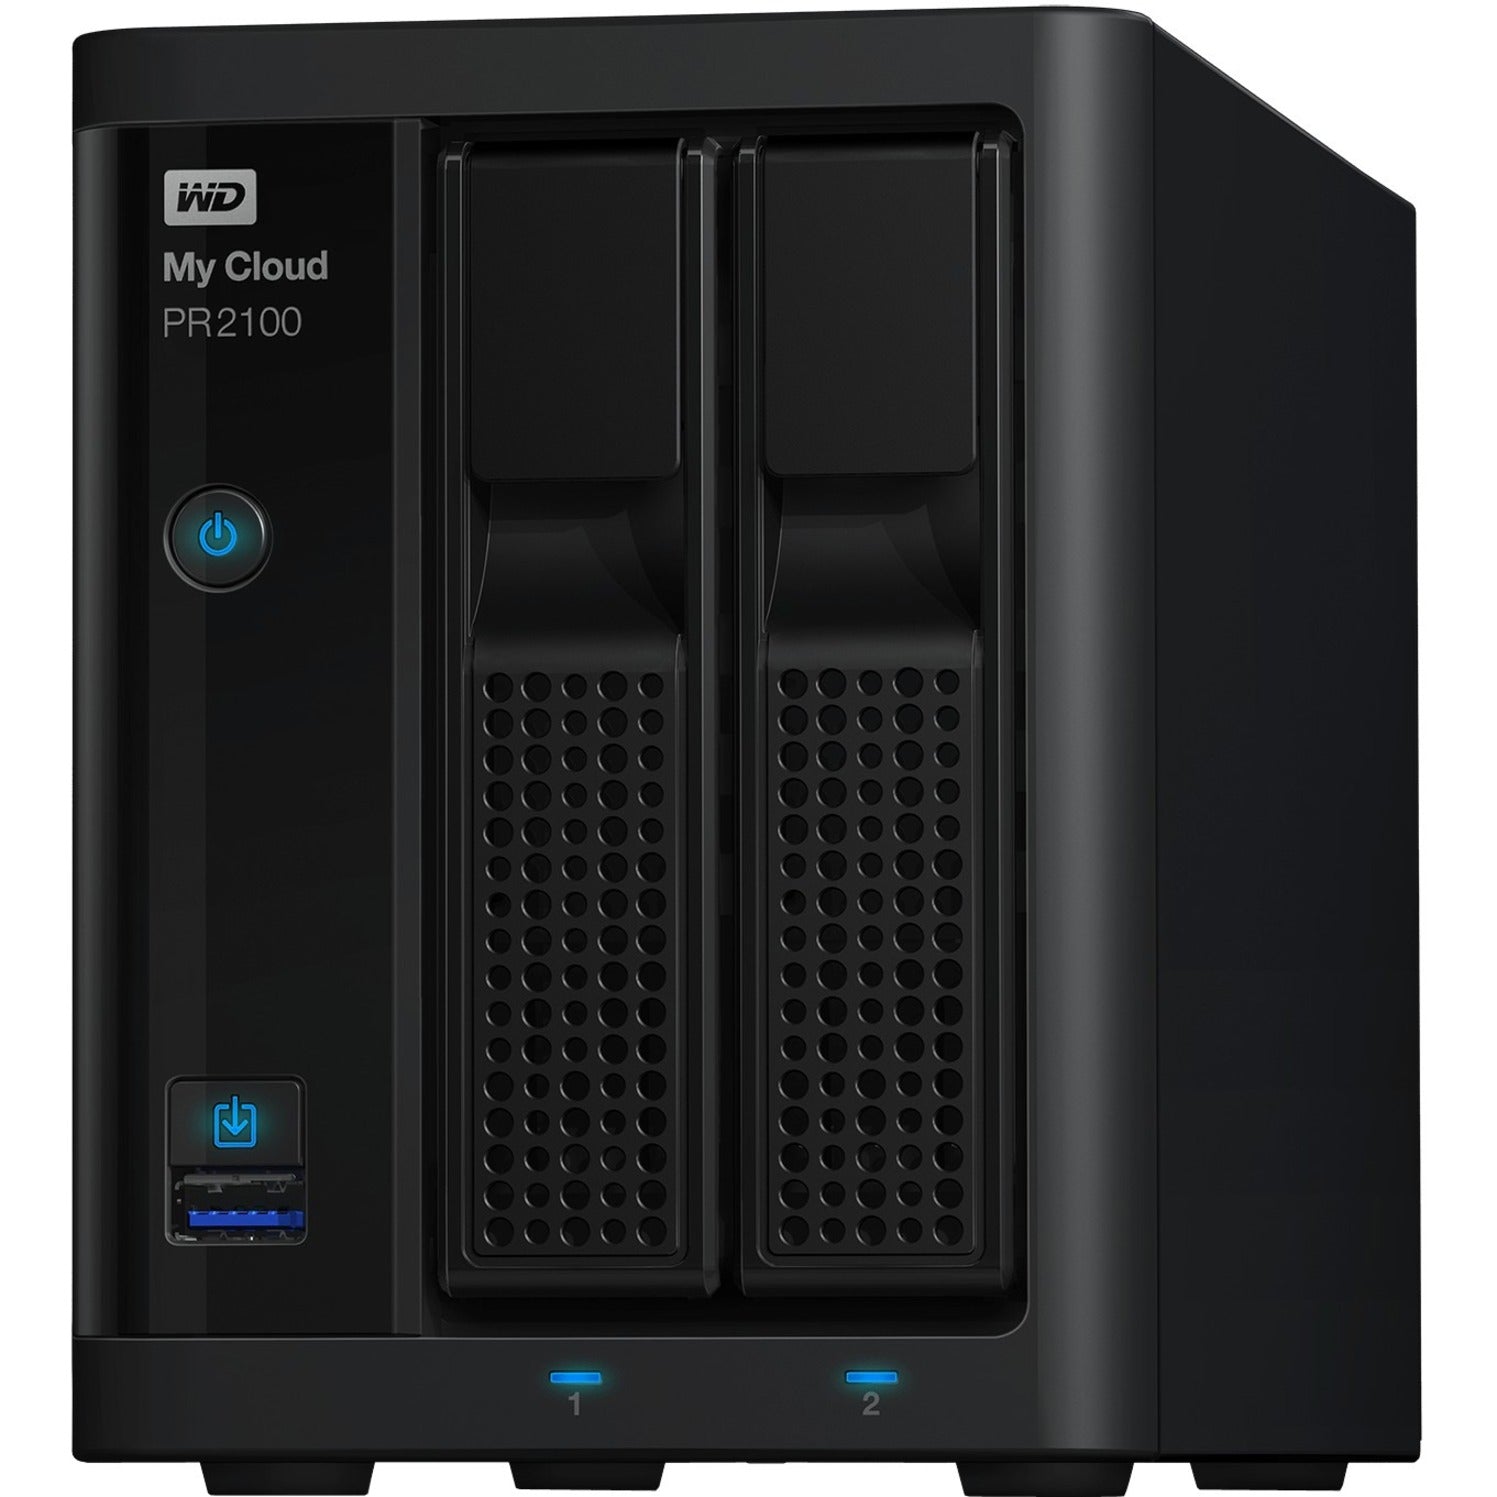 WD WDBBCL0000NBK-NESN 0TB My Cloud PR2100 Pro Series Diskless Media Server with Transcoding, NAS - Network Attached Storage